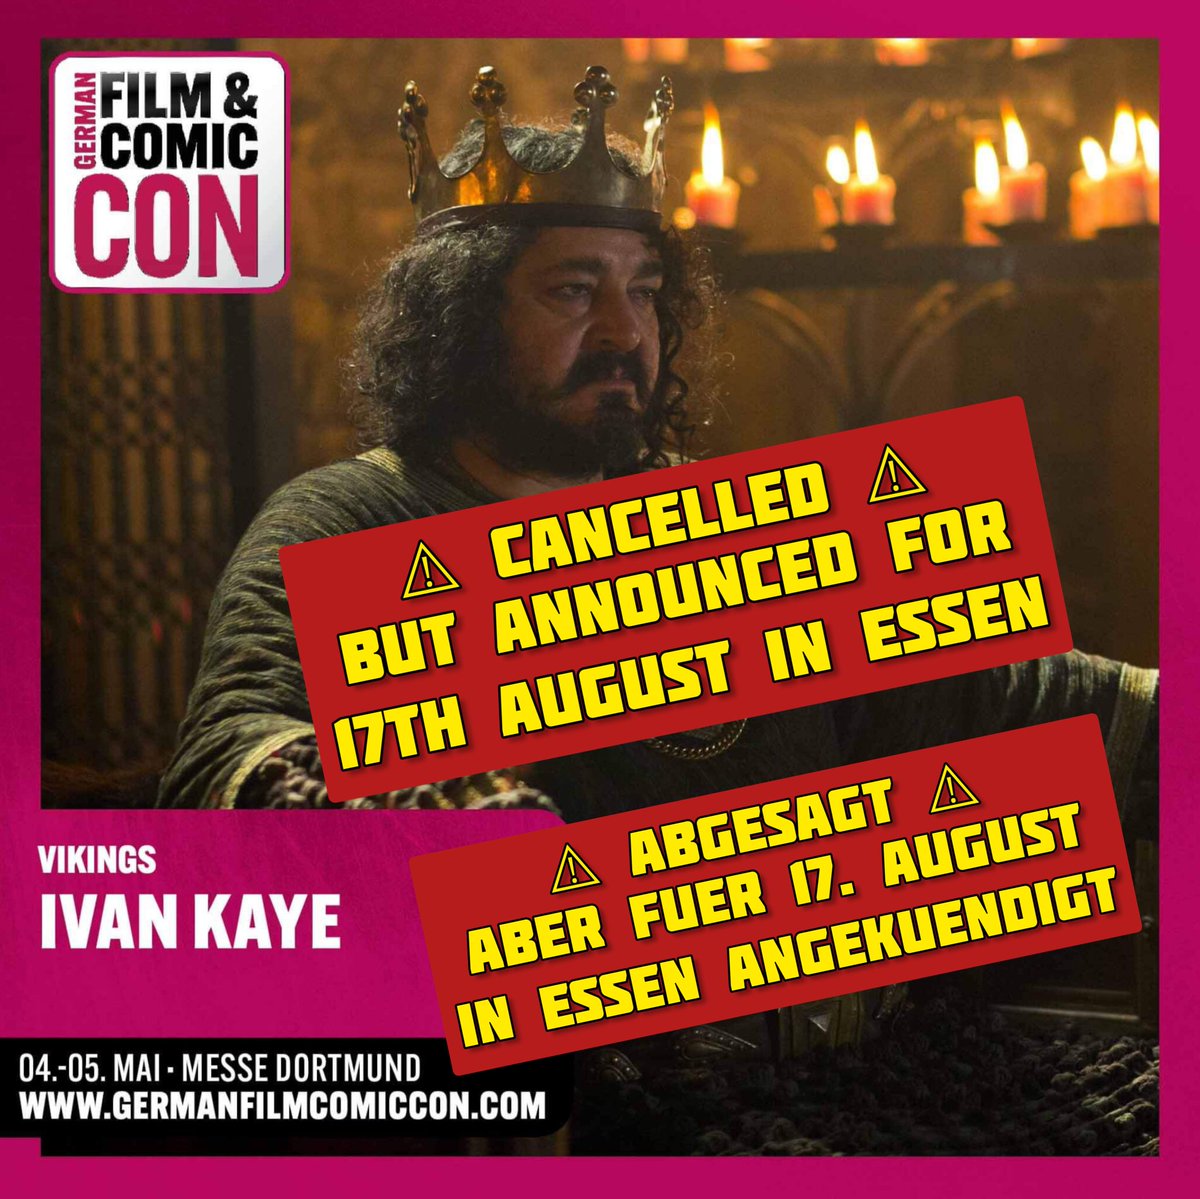 ⚠️Important Info⚠️ Ivan can't make it to the con on 14 May. He is disappointed himself BUT hopes to meet you all on 17 August in Essen! You can keep & use your extra tickets & request to get your entry ticket accepted by 26 April at service@weloveconventions.com!
.
#IvanKaye